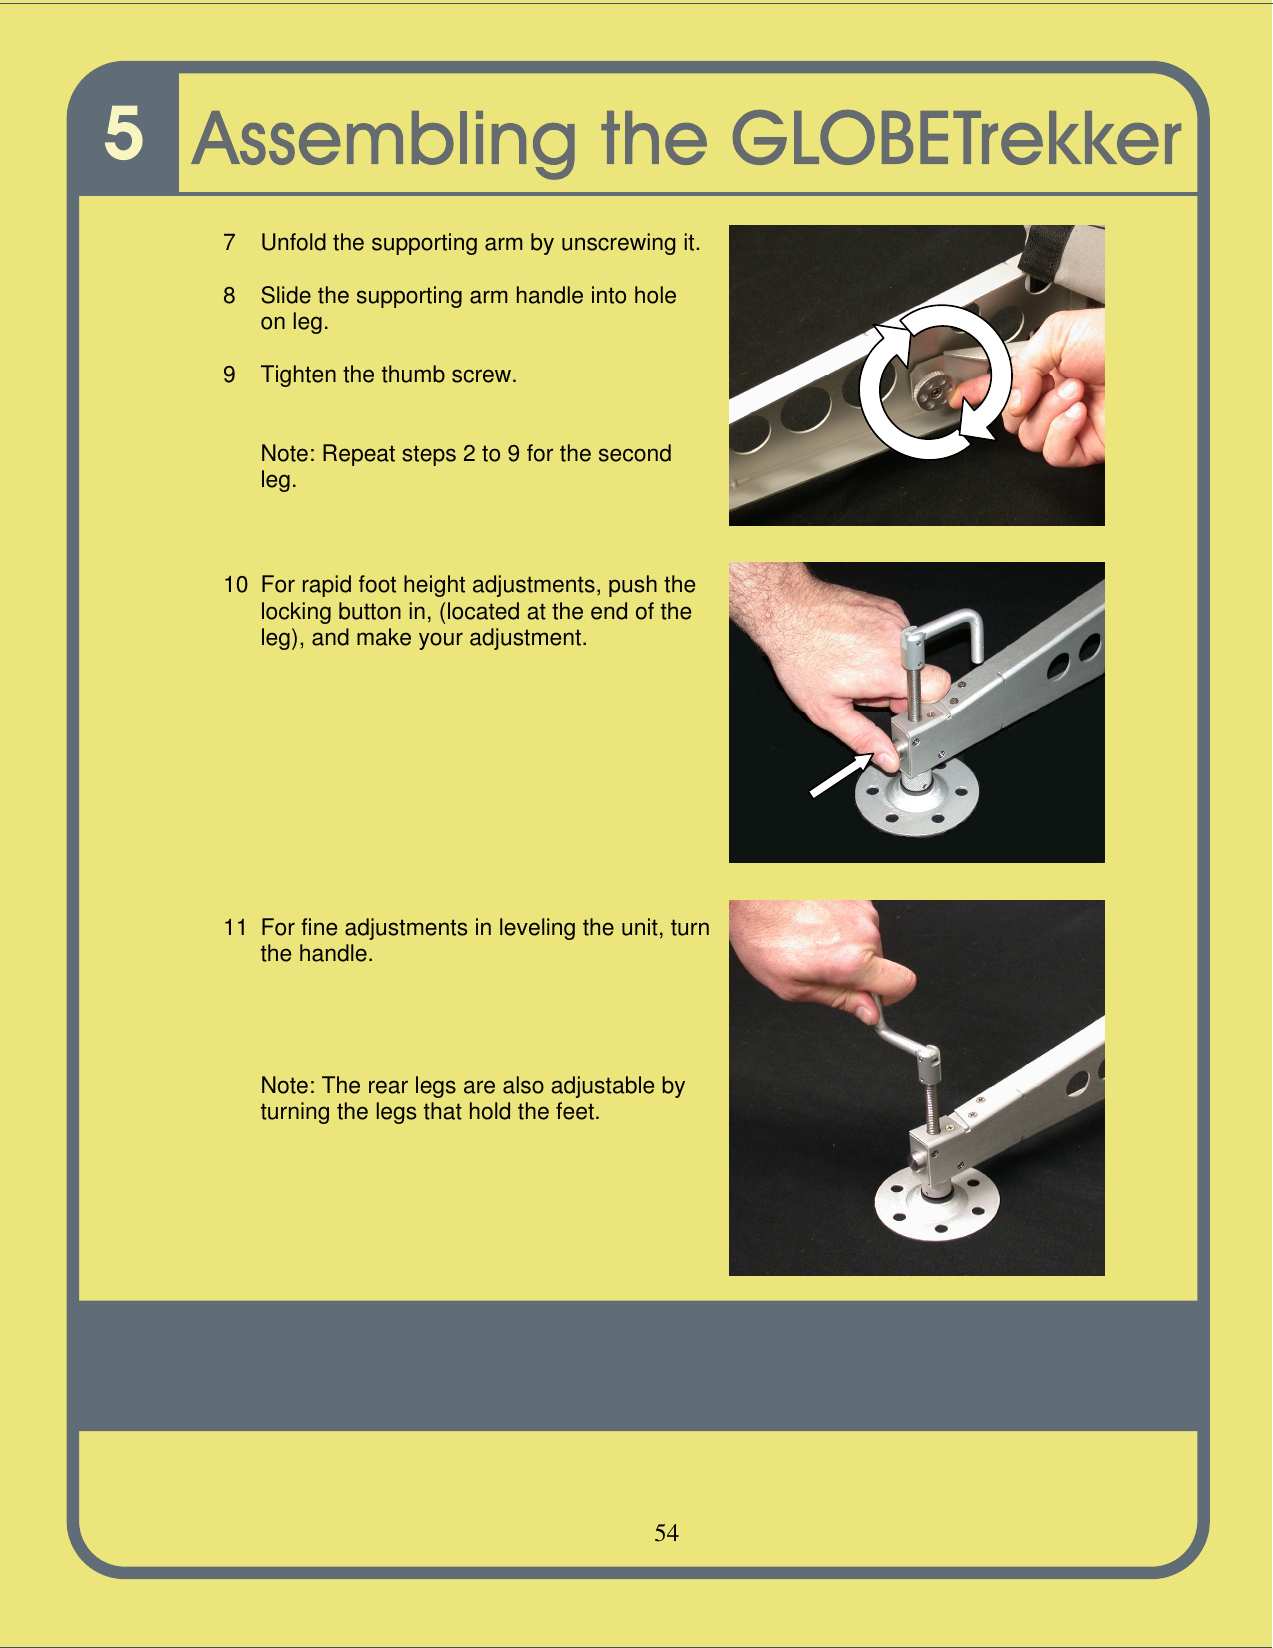   54    7 Unfold the supporting arm by unscrewing it.  8 Slide the supporting arm handle into hole on leg.  9 Tighten the thumb screw.   Note: Repeat steps 2 to 9 for the second leg.    10 For rapid foot height adjustments, push the locking button in, (located at the end of the leg), and make your adjustment.            11 For fine adjustments in leveling the unit, turn the handle.       Note: The rear legs are also adjustable by turning the legs that hold the feet.        